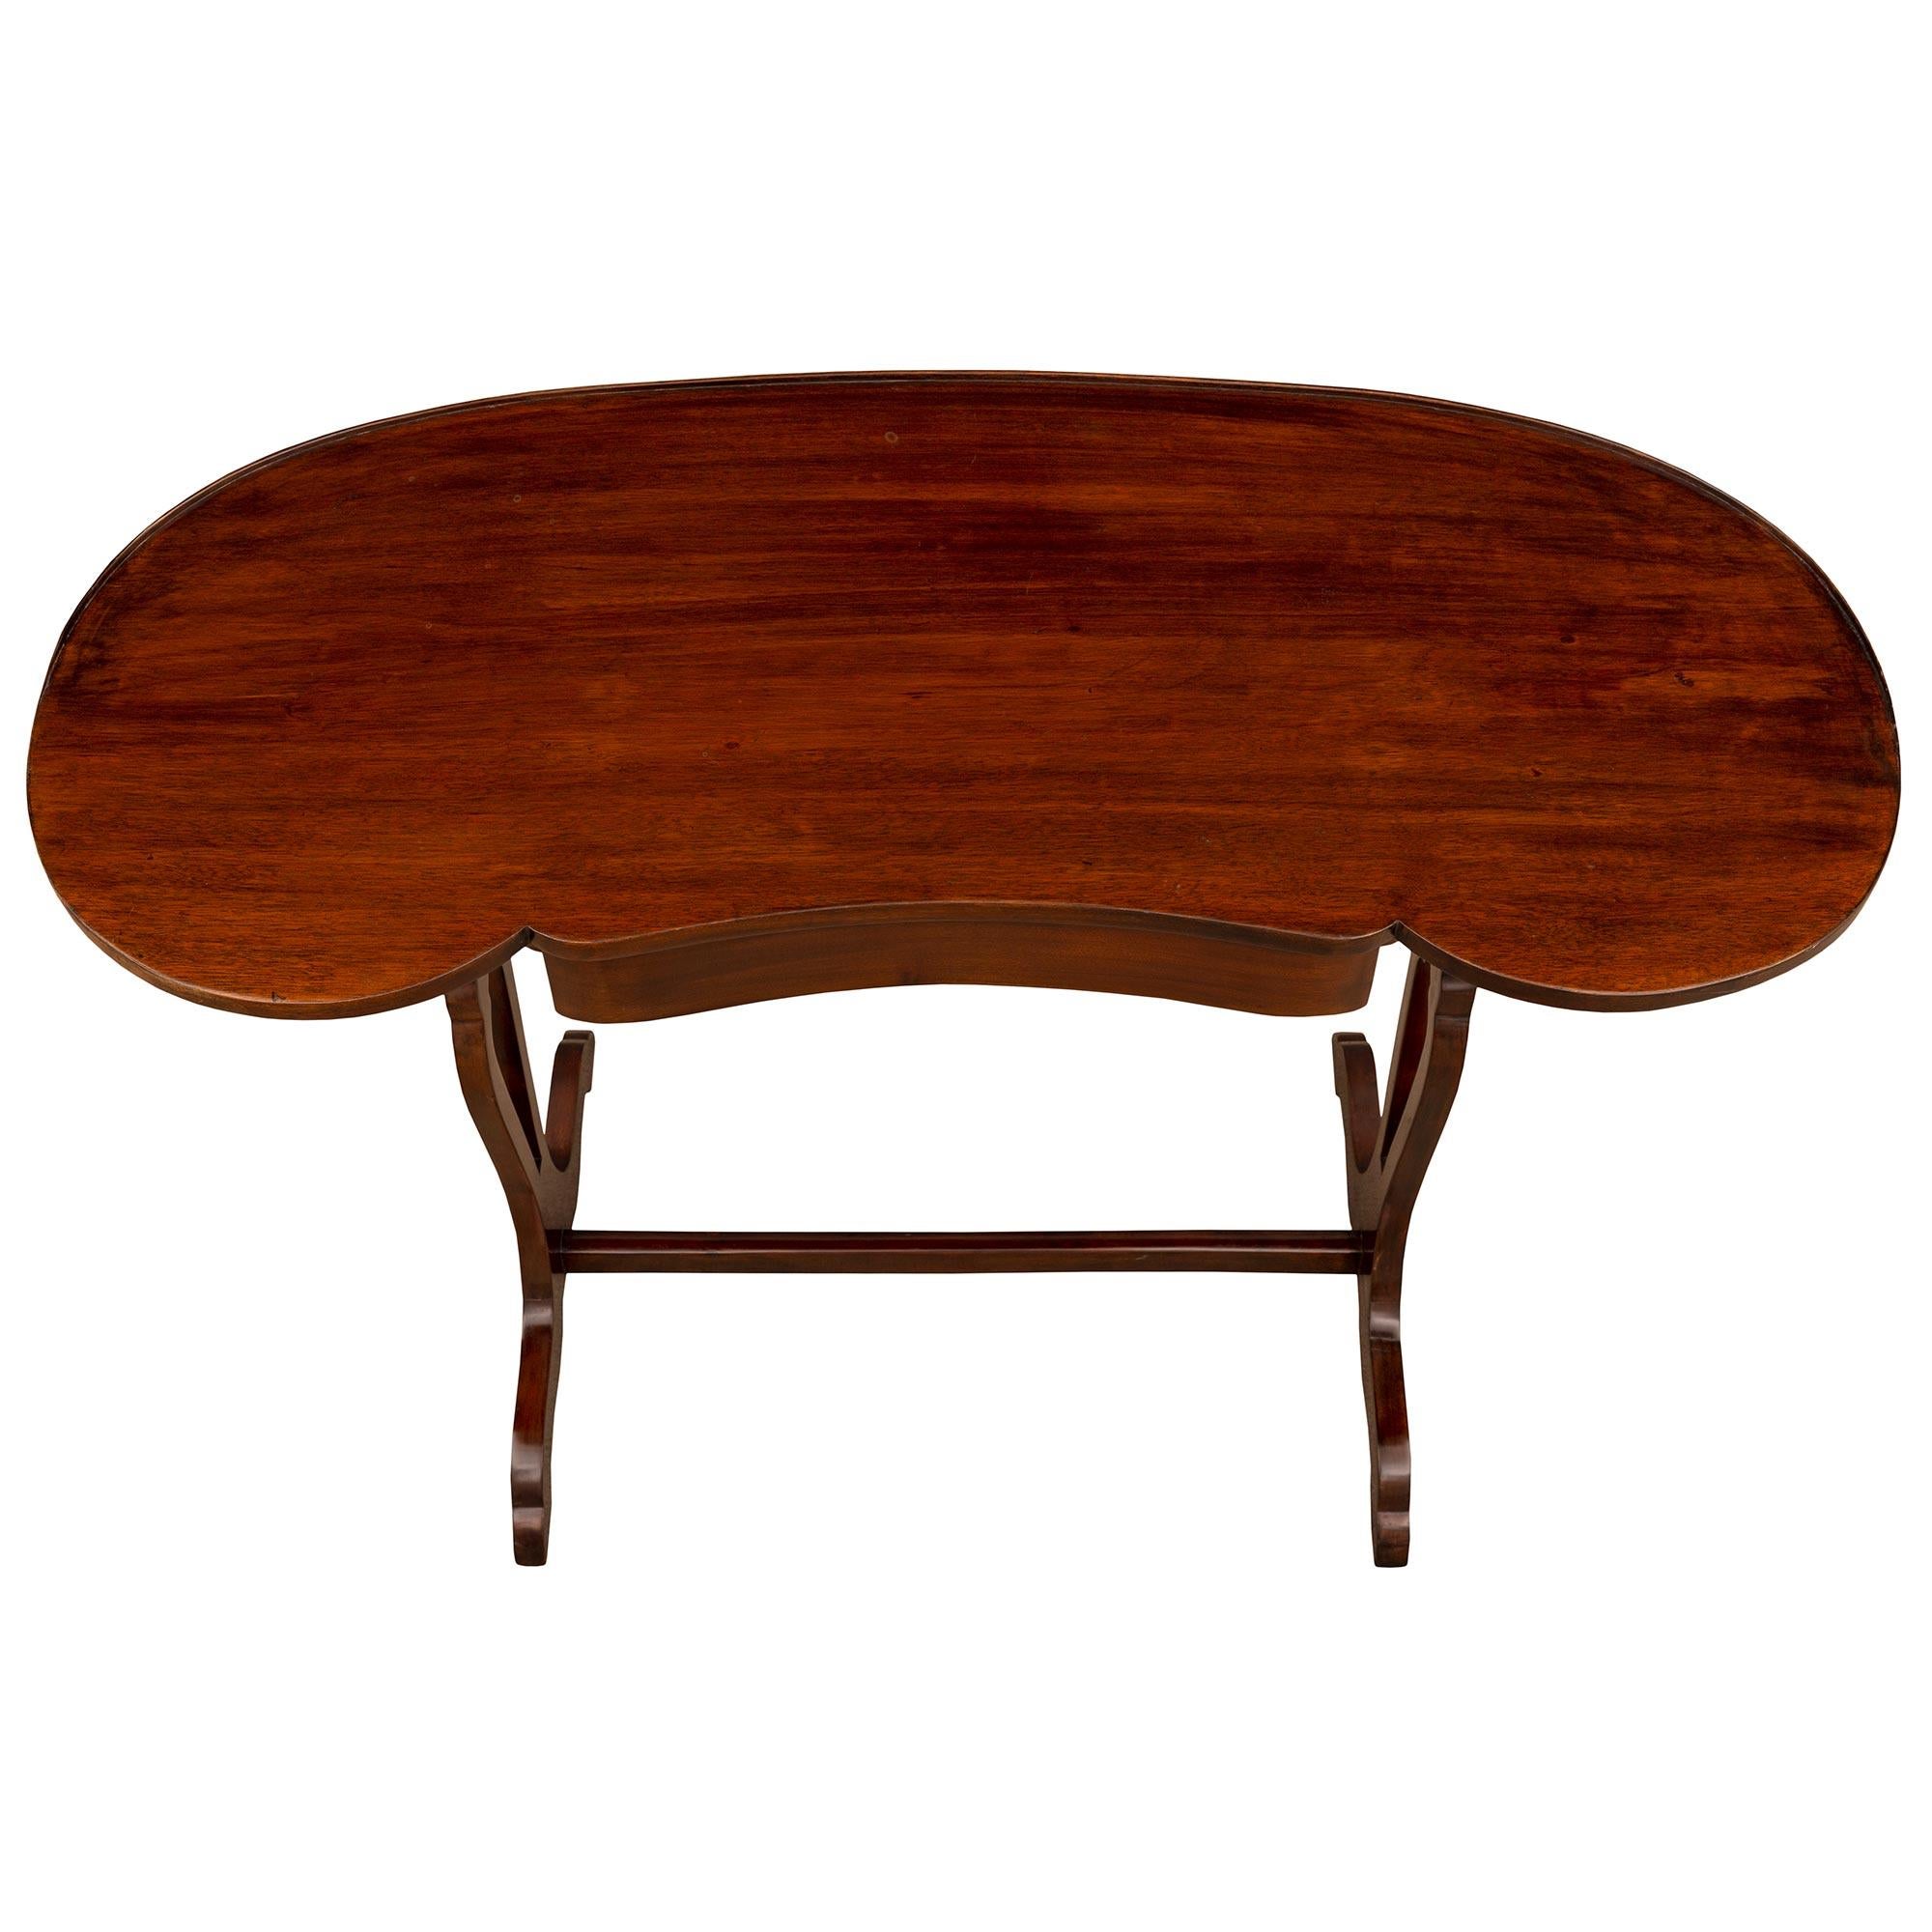 A lovely French 19th century Louis XVI st. Mahogany side table/desk. The kidney shaped Table à Écrire is raised by elegantly curved supports connected with a fine stretcher below the beautiful pierced baluster shaped supports. The top displays a